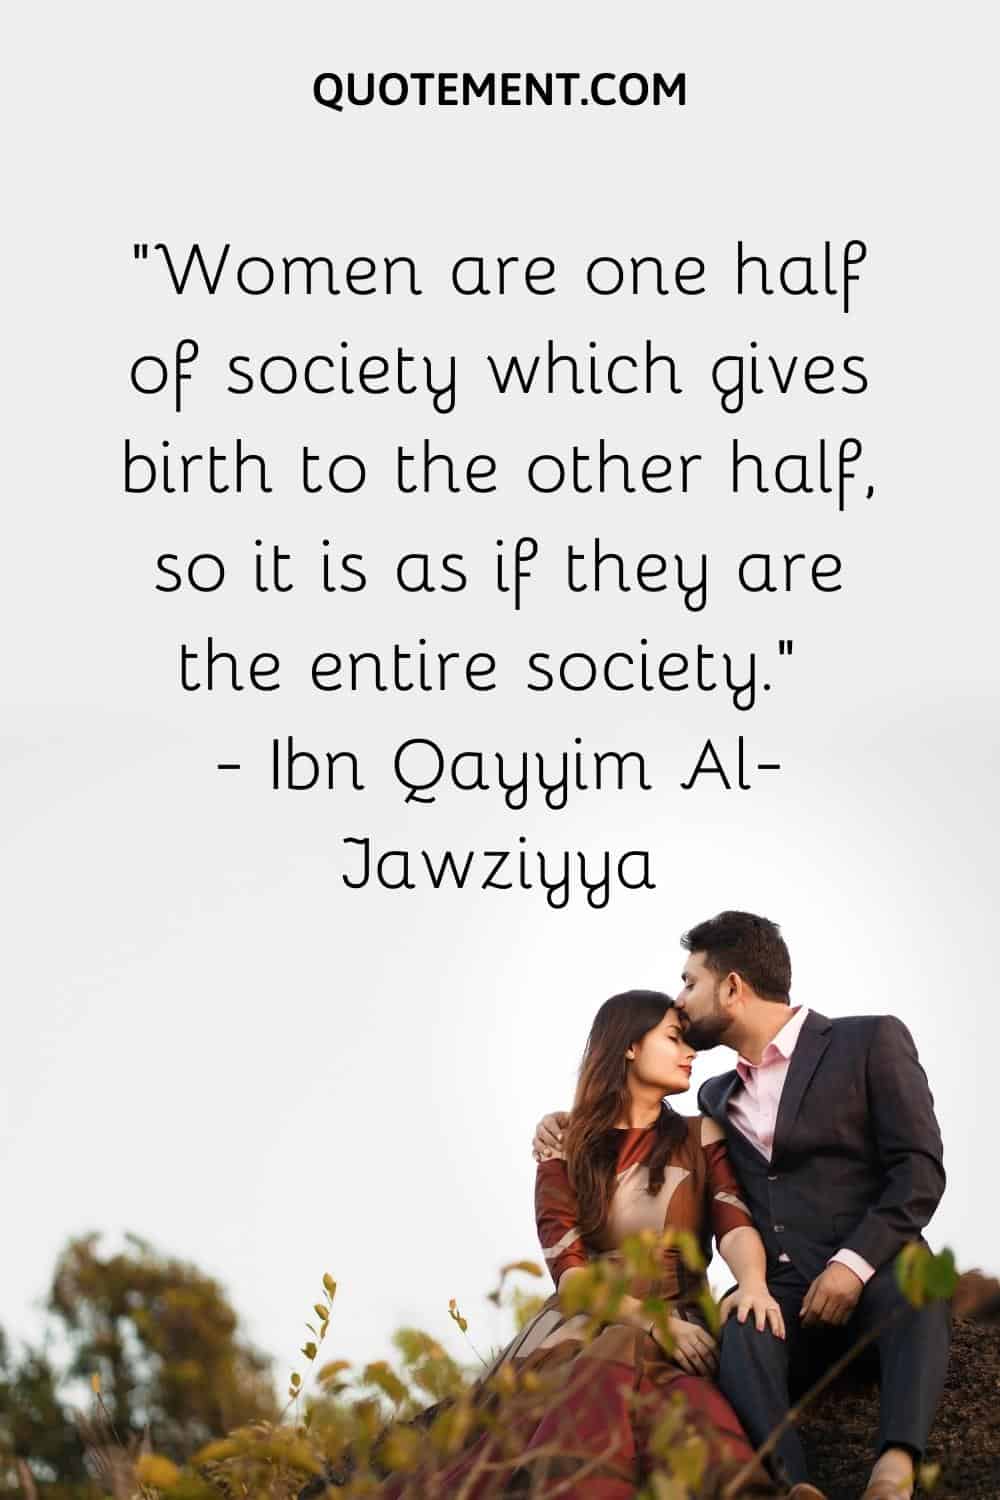 Women are one half of society which gives birth to the other half, so it is as if they are the entire society